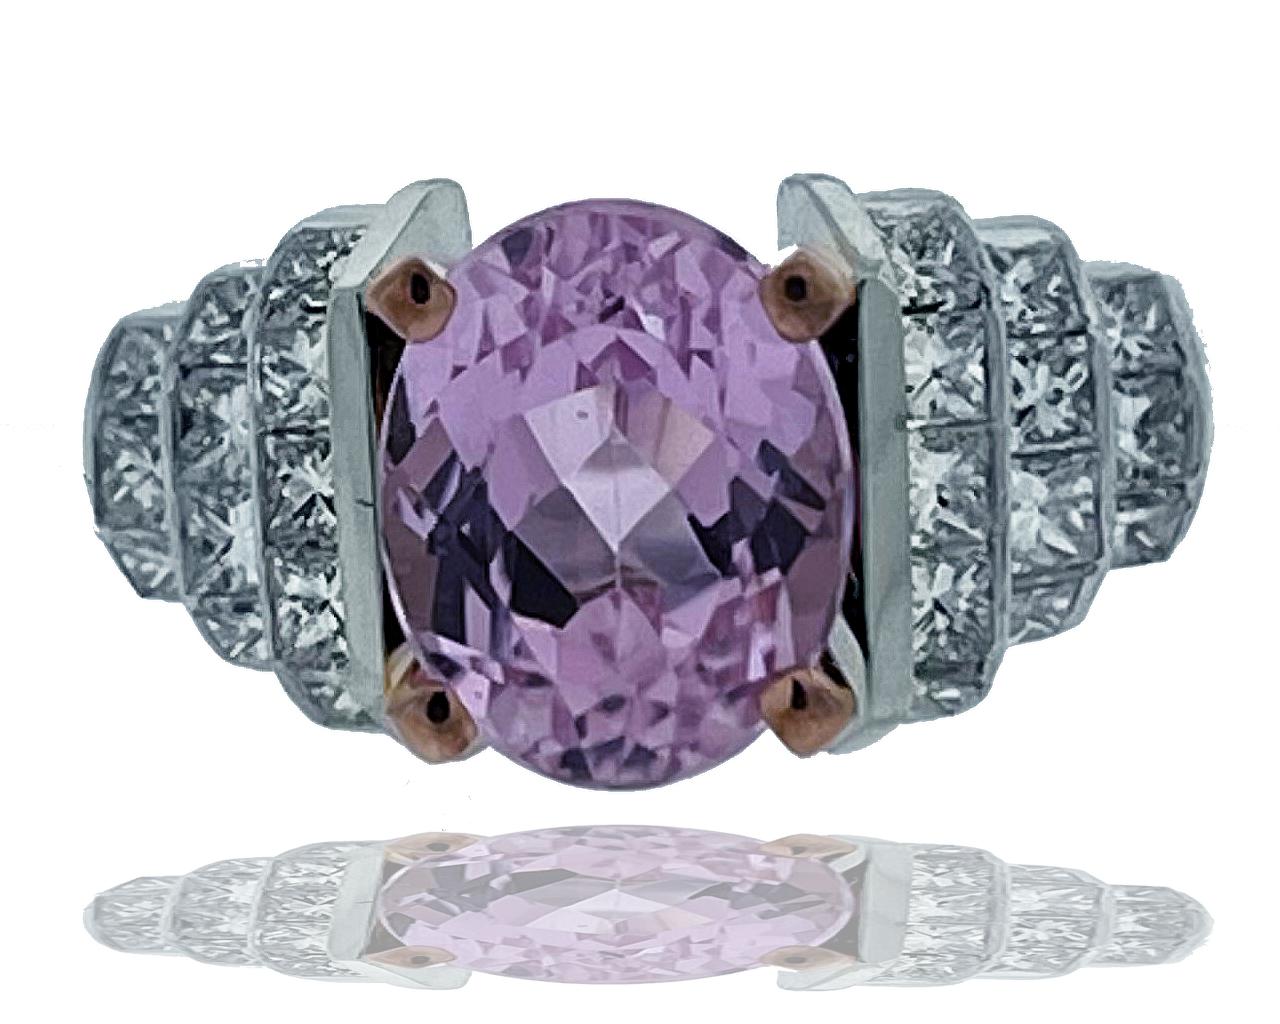 This stunning diamond and Kunzite ring have a gorgeous mix of cool pink tones and white diamonds.  The center is an oval cut Kunzite which weighs approx. 3 carats and sits in a rose gold head.  The shank of this ring has twenty-four princess cut